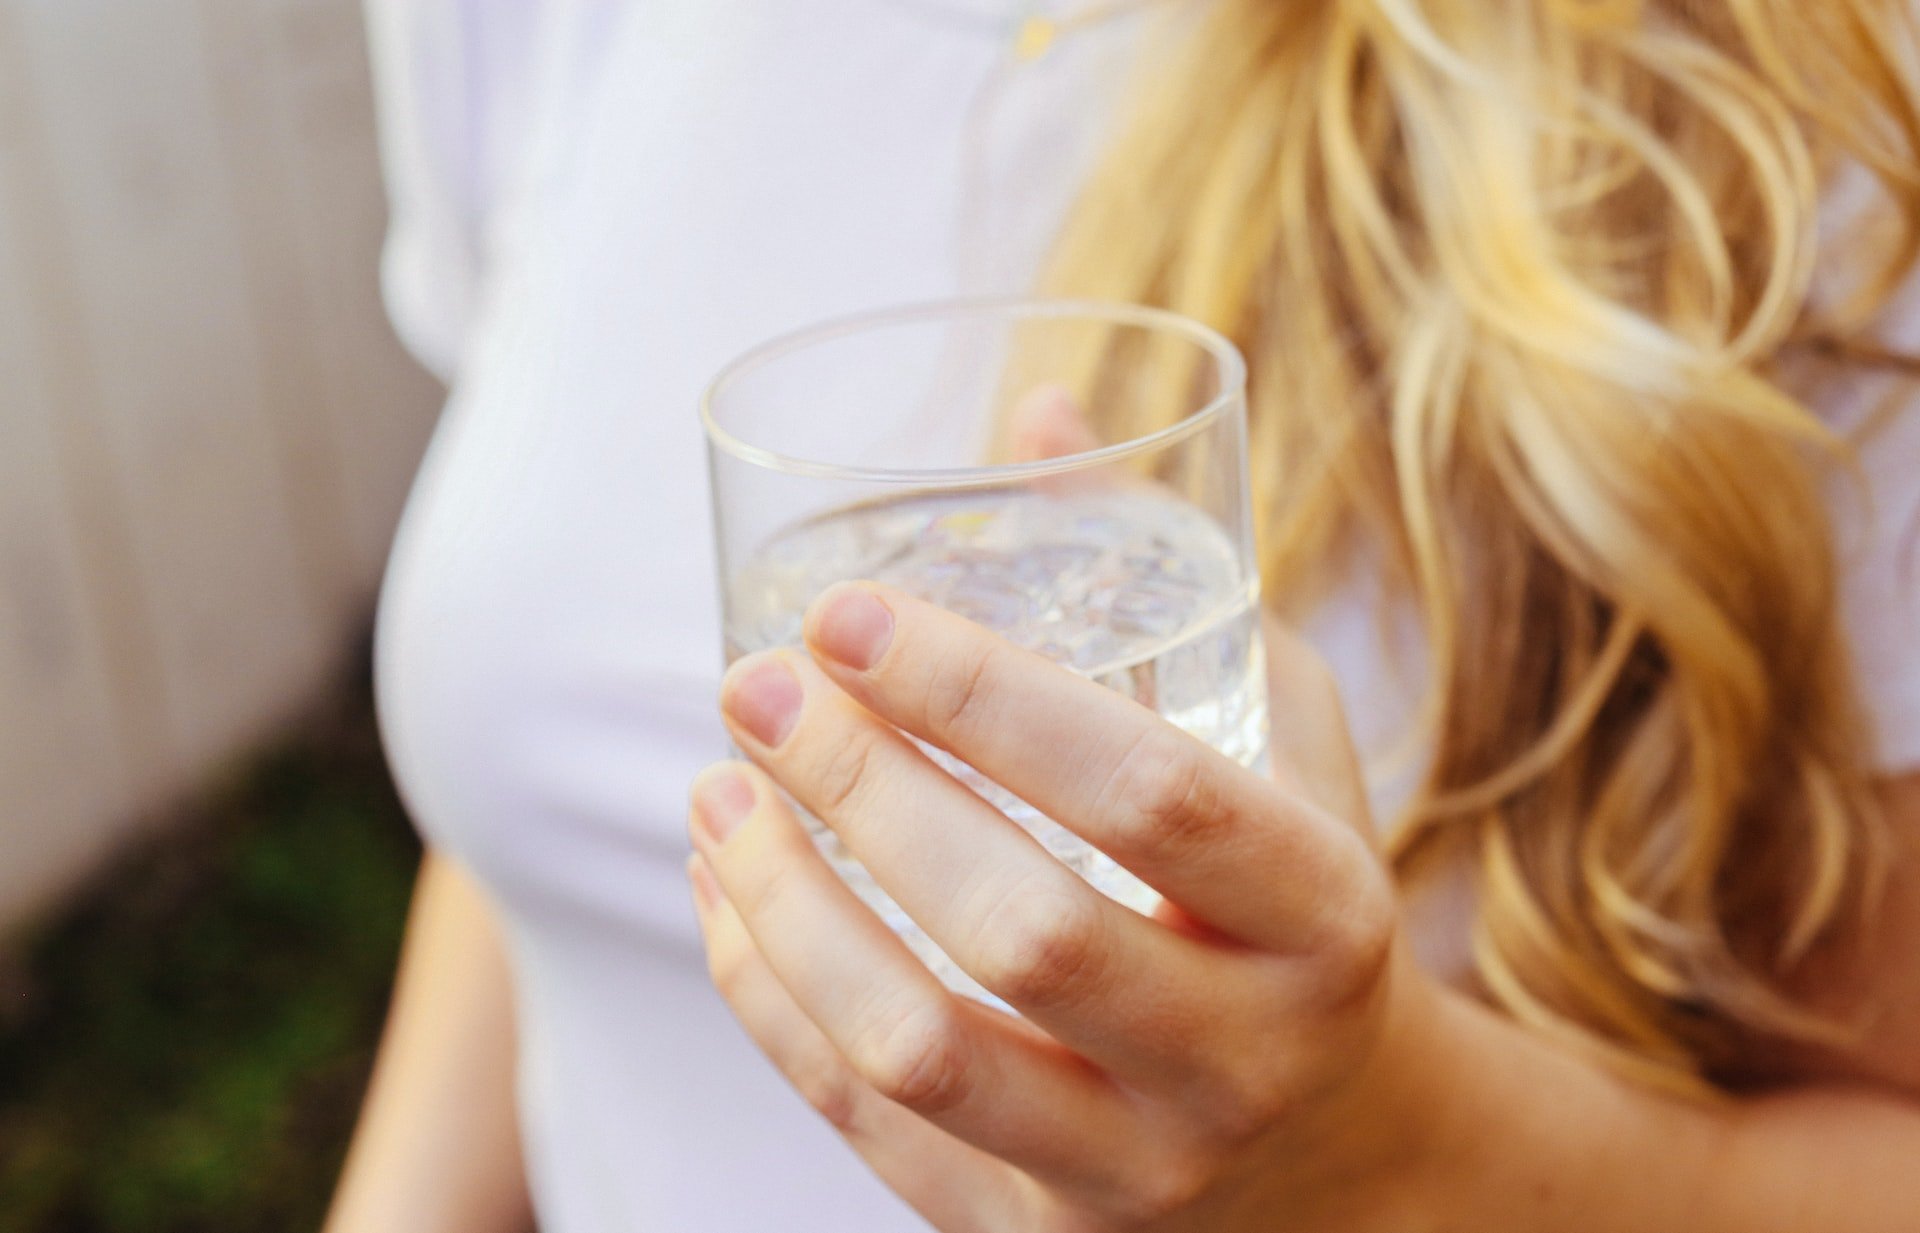 A woman holding a glass of water.